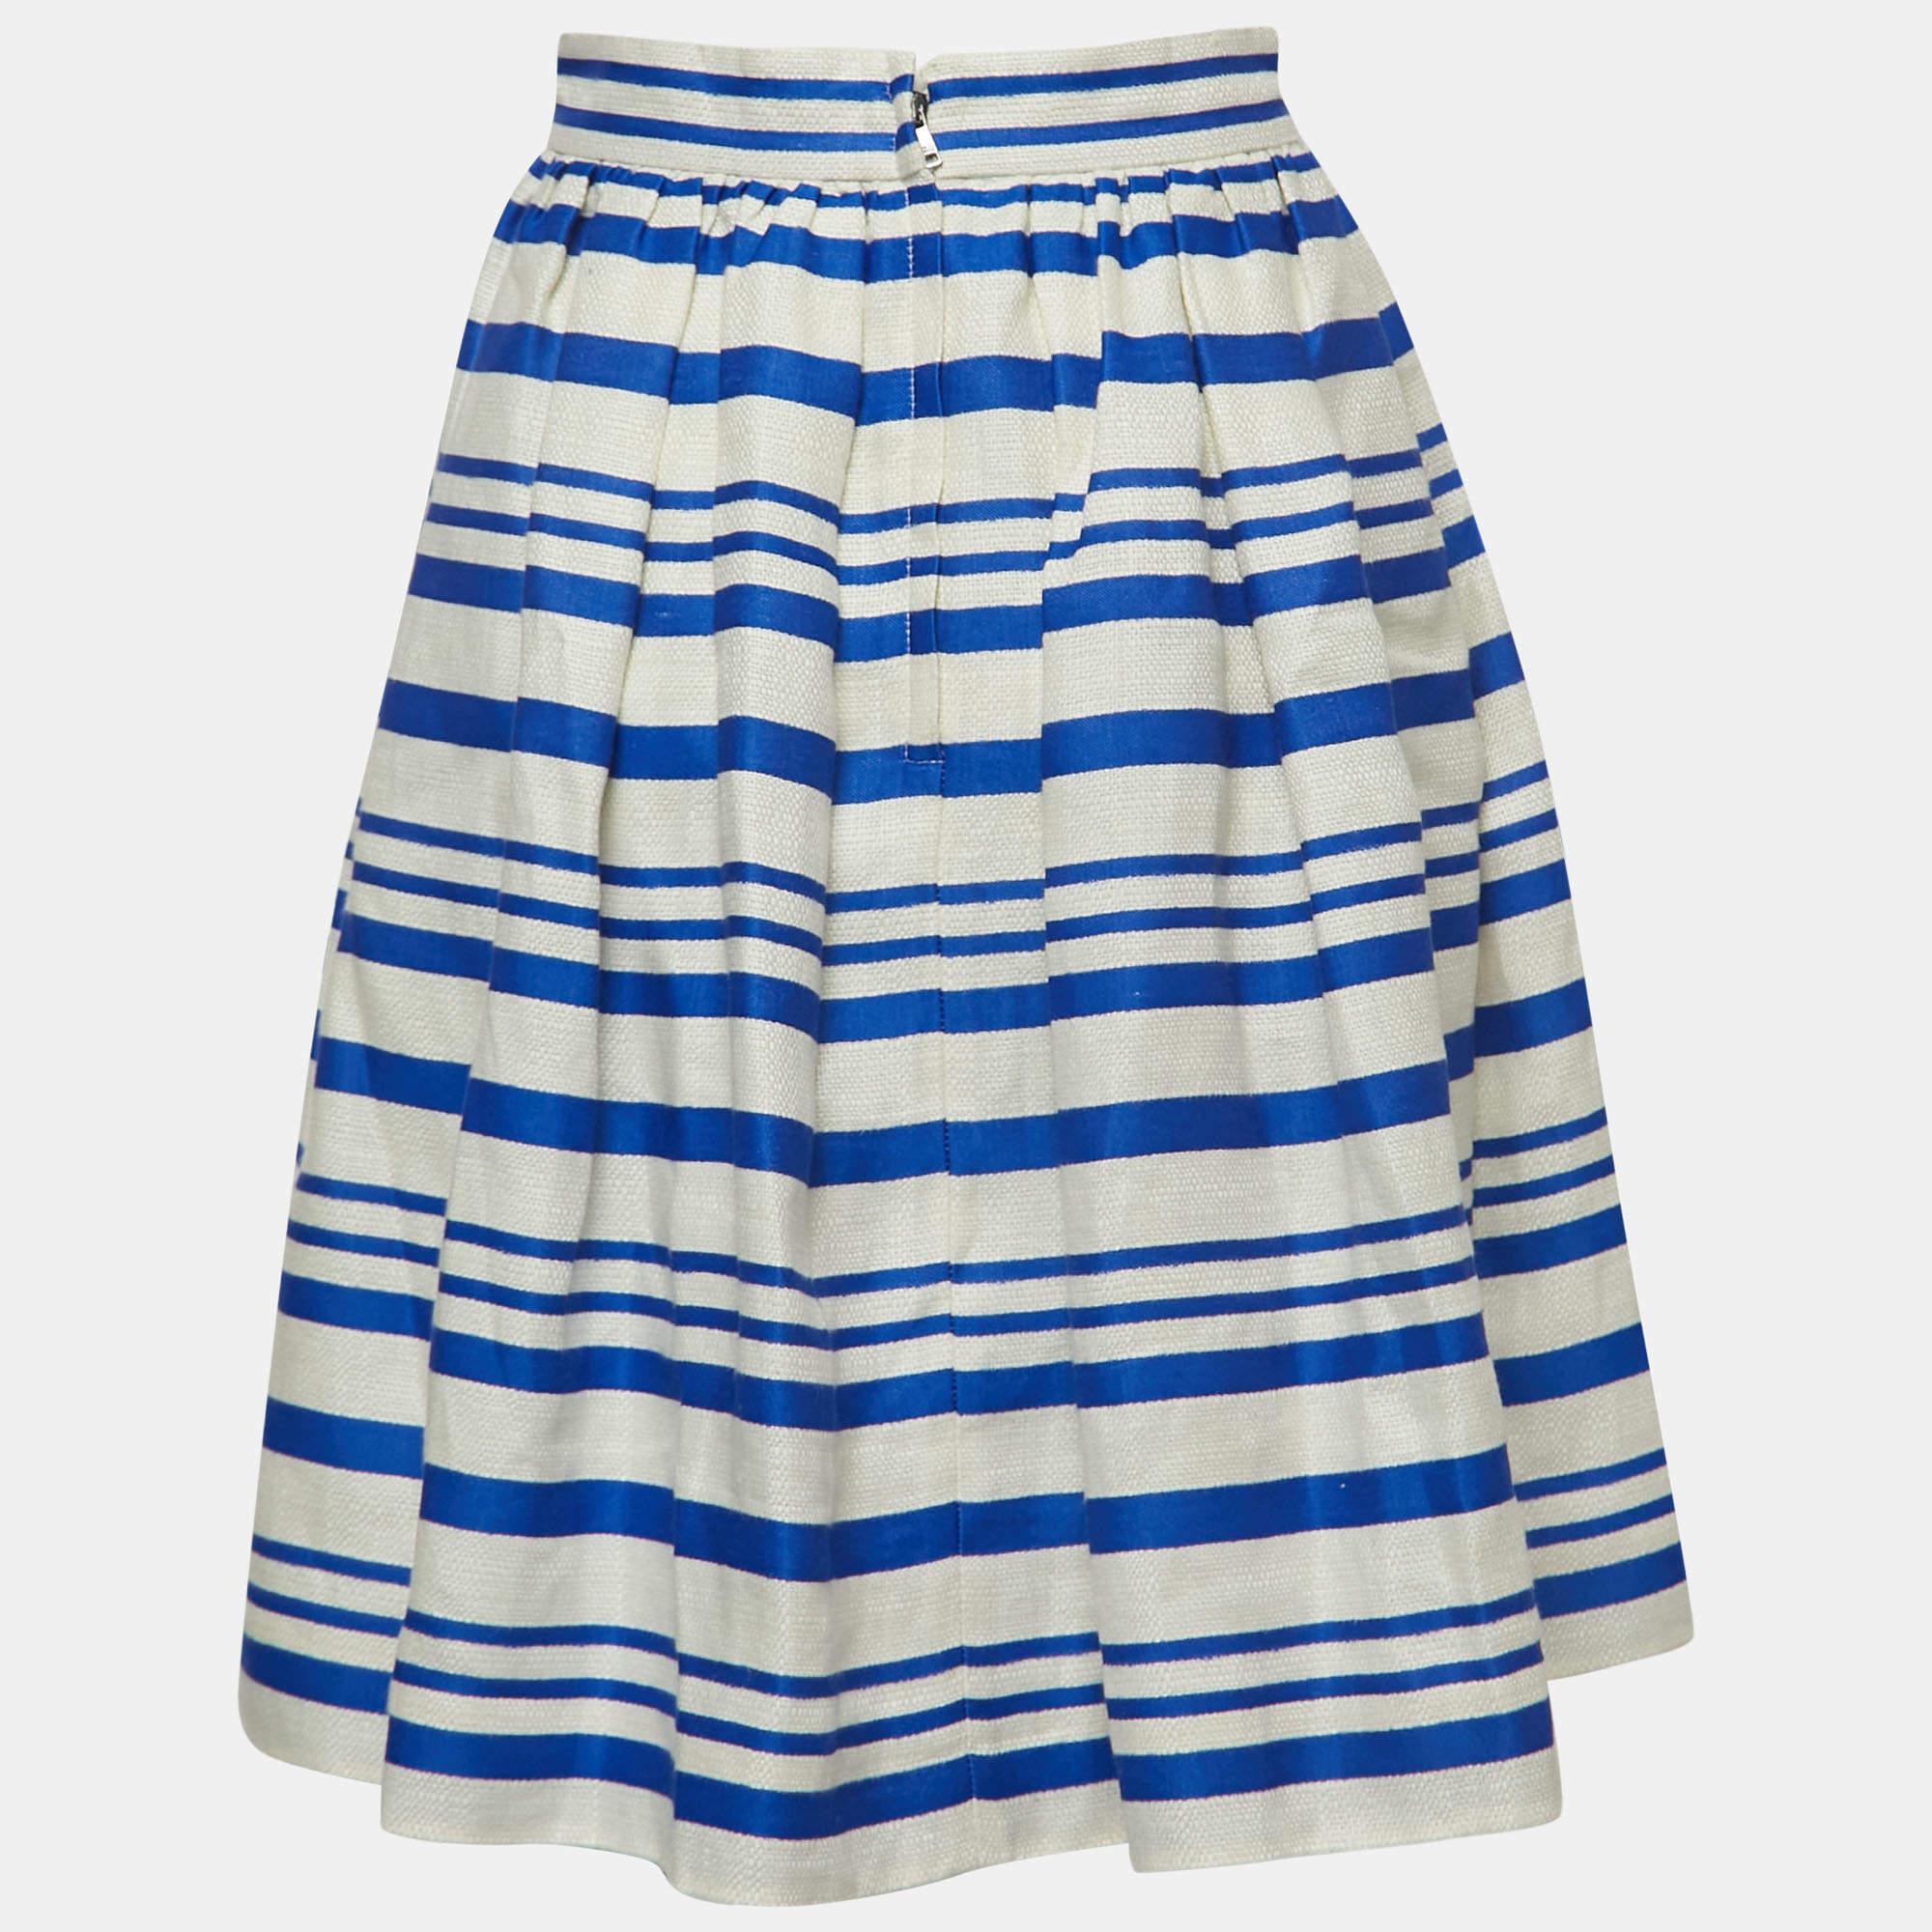 This lovely skirt is beautifully stitched from fine fabric. The comfy designer skirt has a flattering silhouette. Pair it with a simple top and strappy heels for a chic look.

